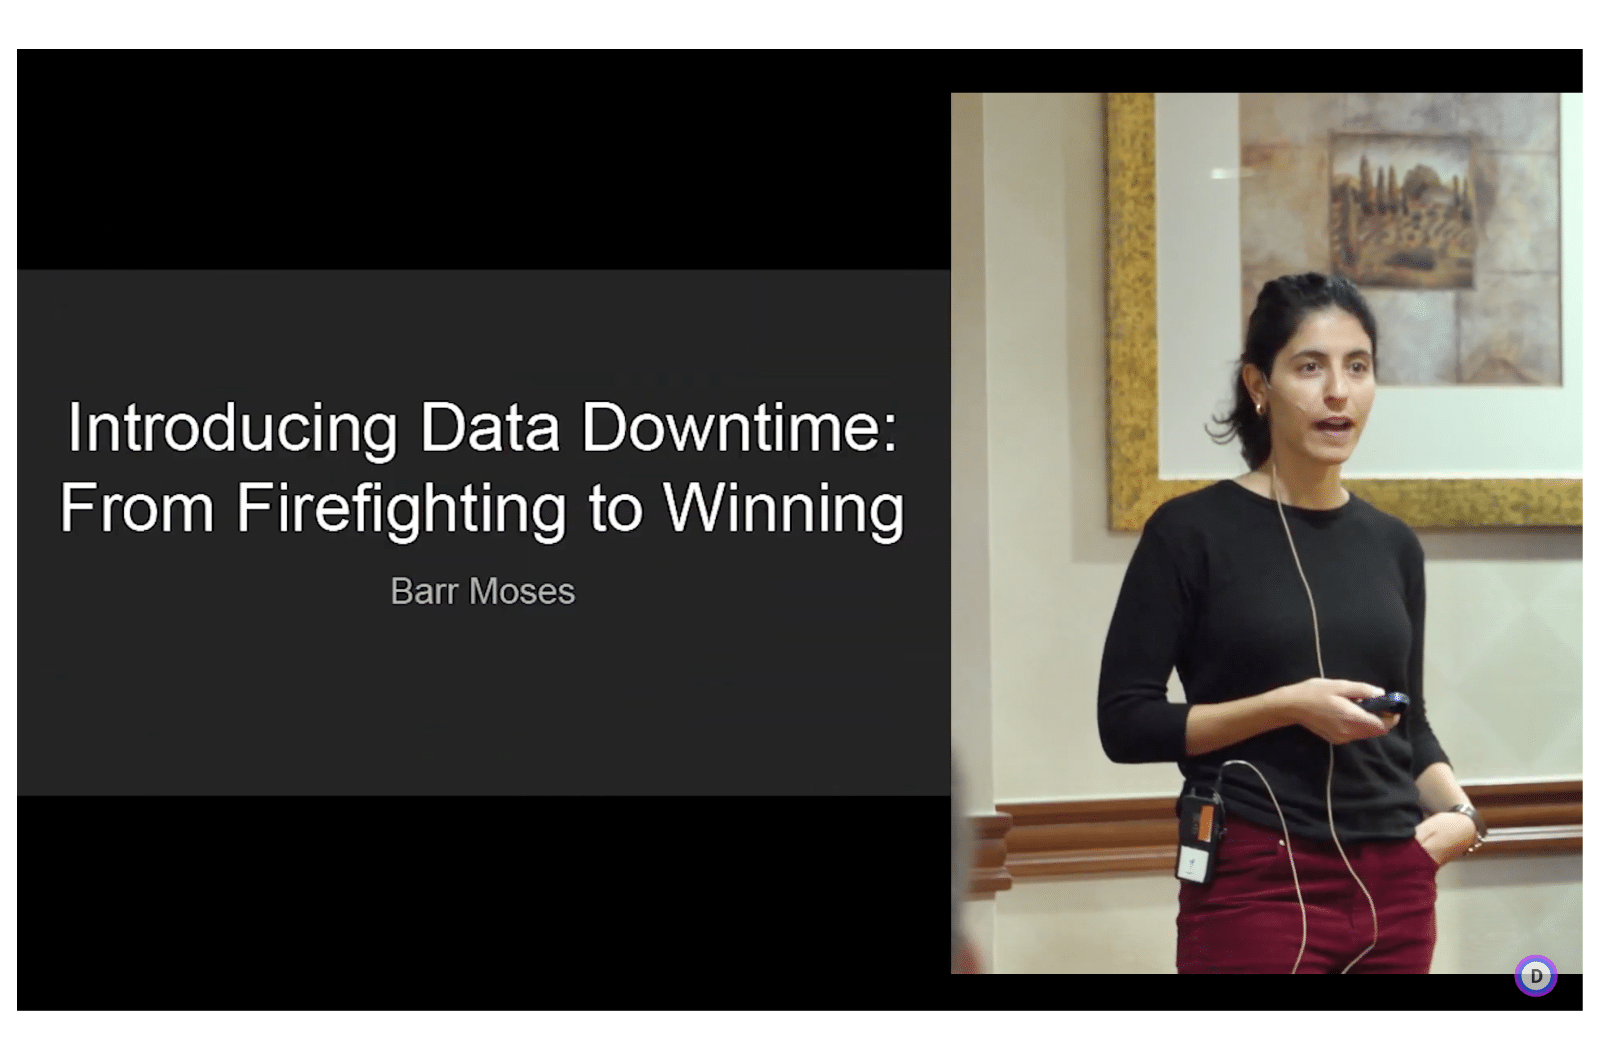 [VIDEO] Introducing Data Downtime: From Firefighting to Winning